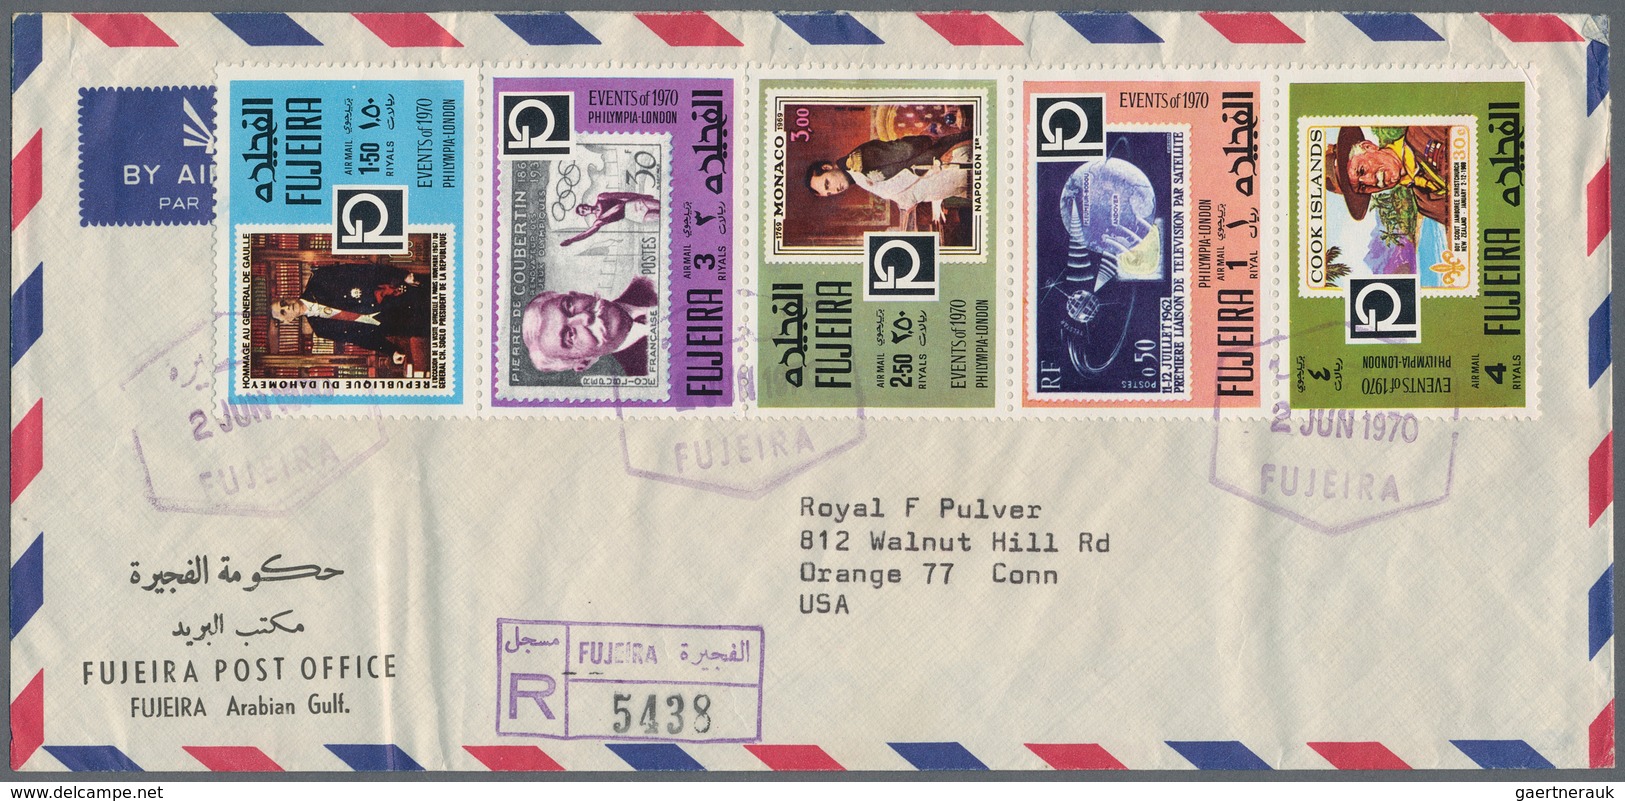 24672 Asien: 1965/1971, GULF STATES (Ajman, Dubai, Fujeira), group of eight (mainly registered) airmail co